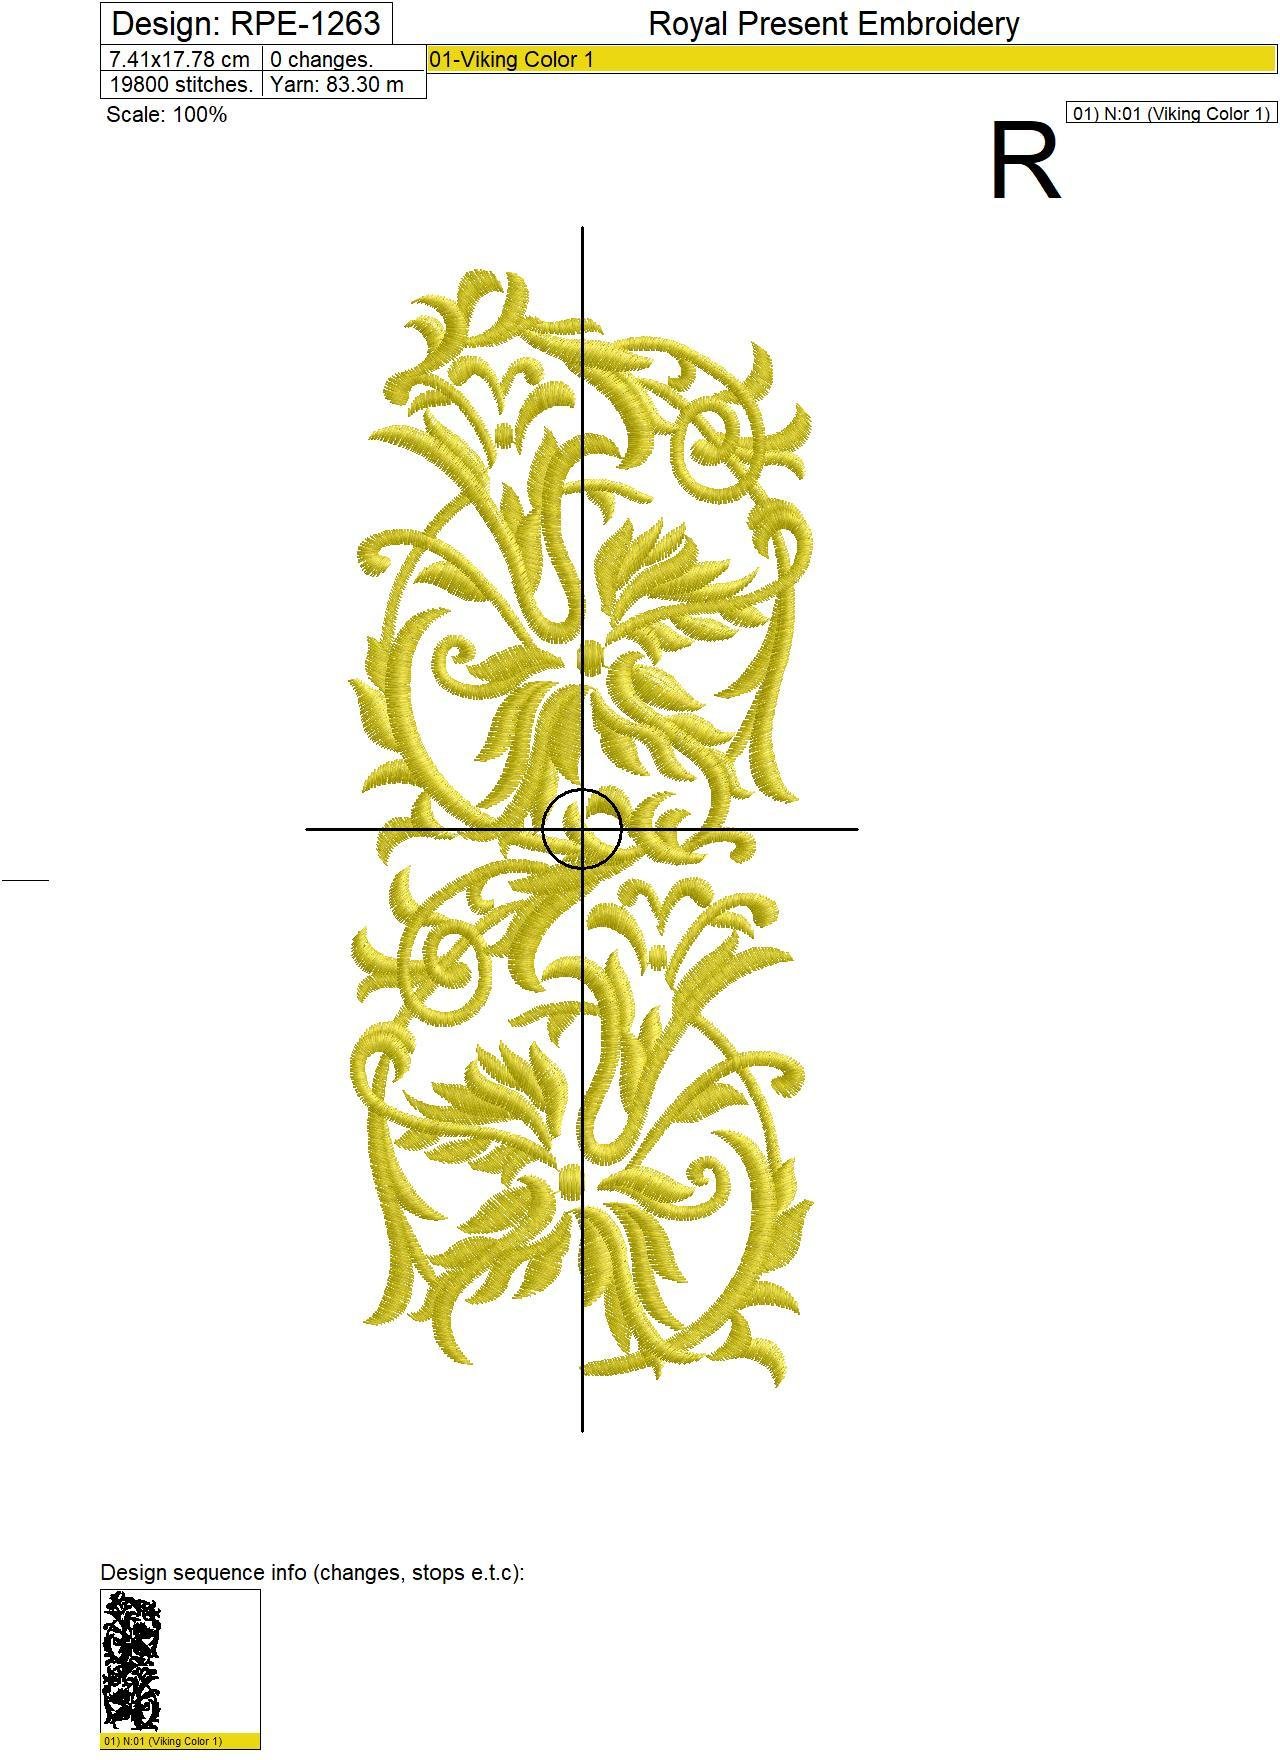 Golden border Embroidery Design - 3 sizes | Royal Present Embroidery